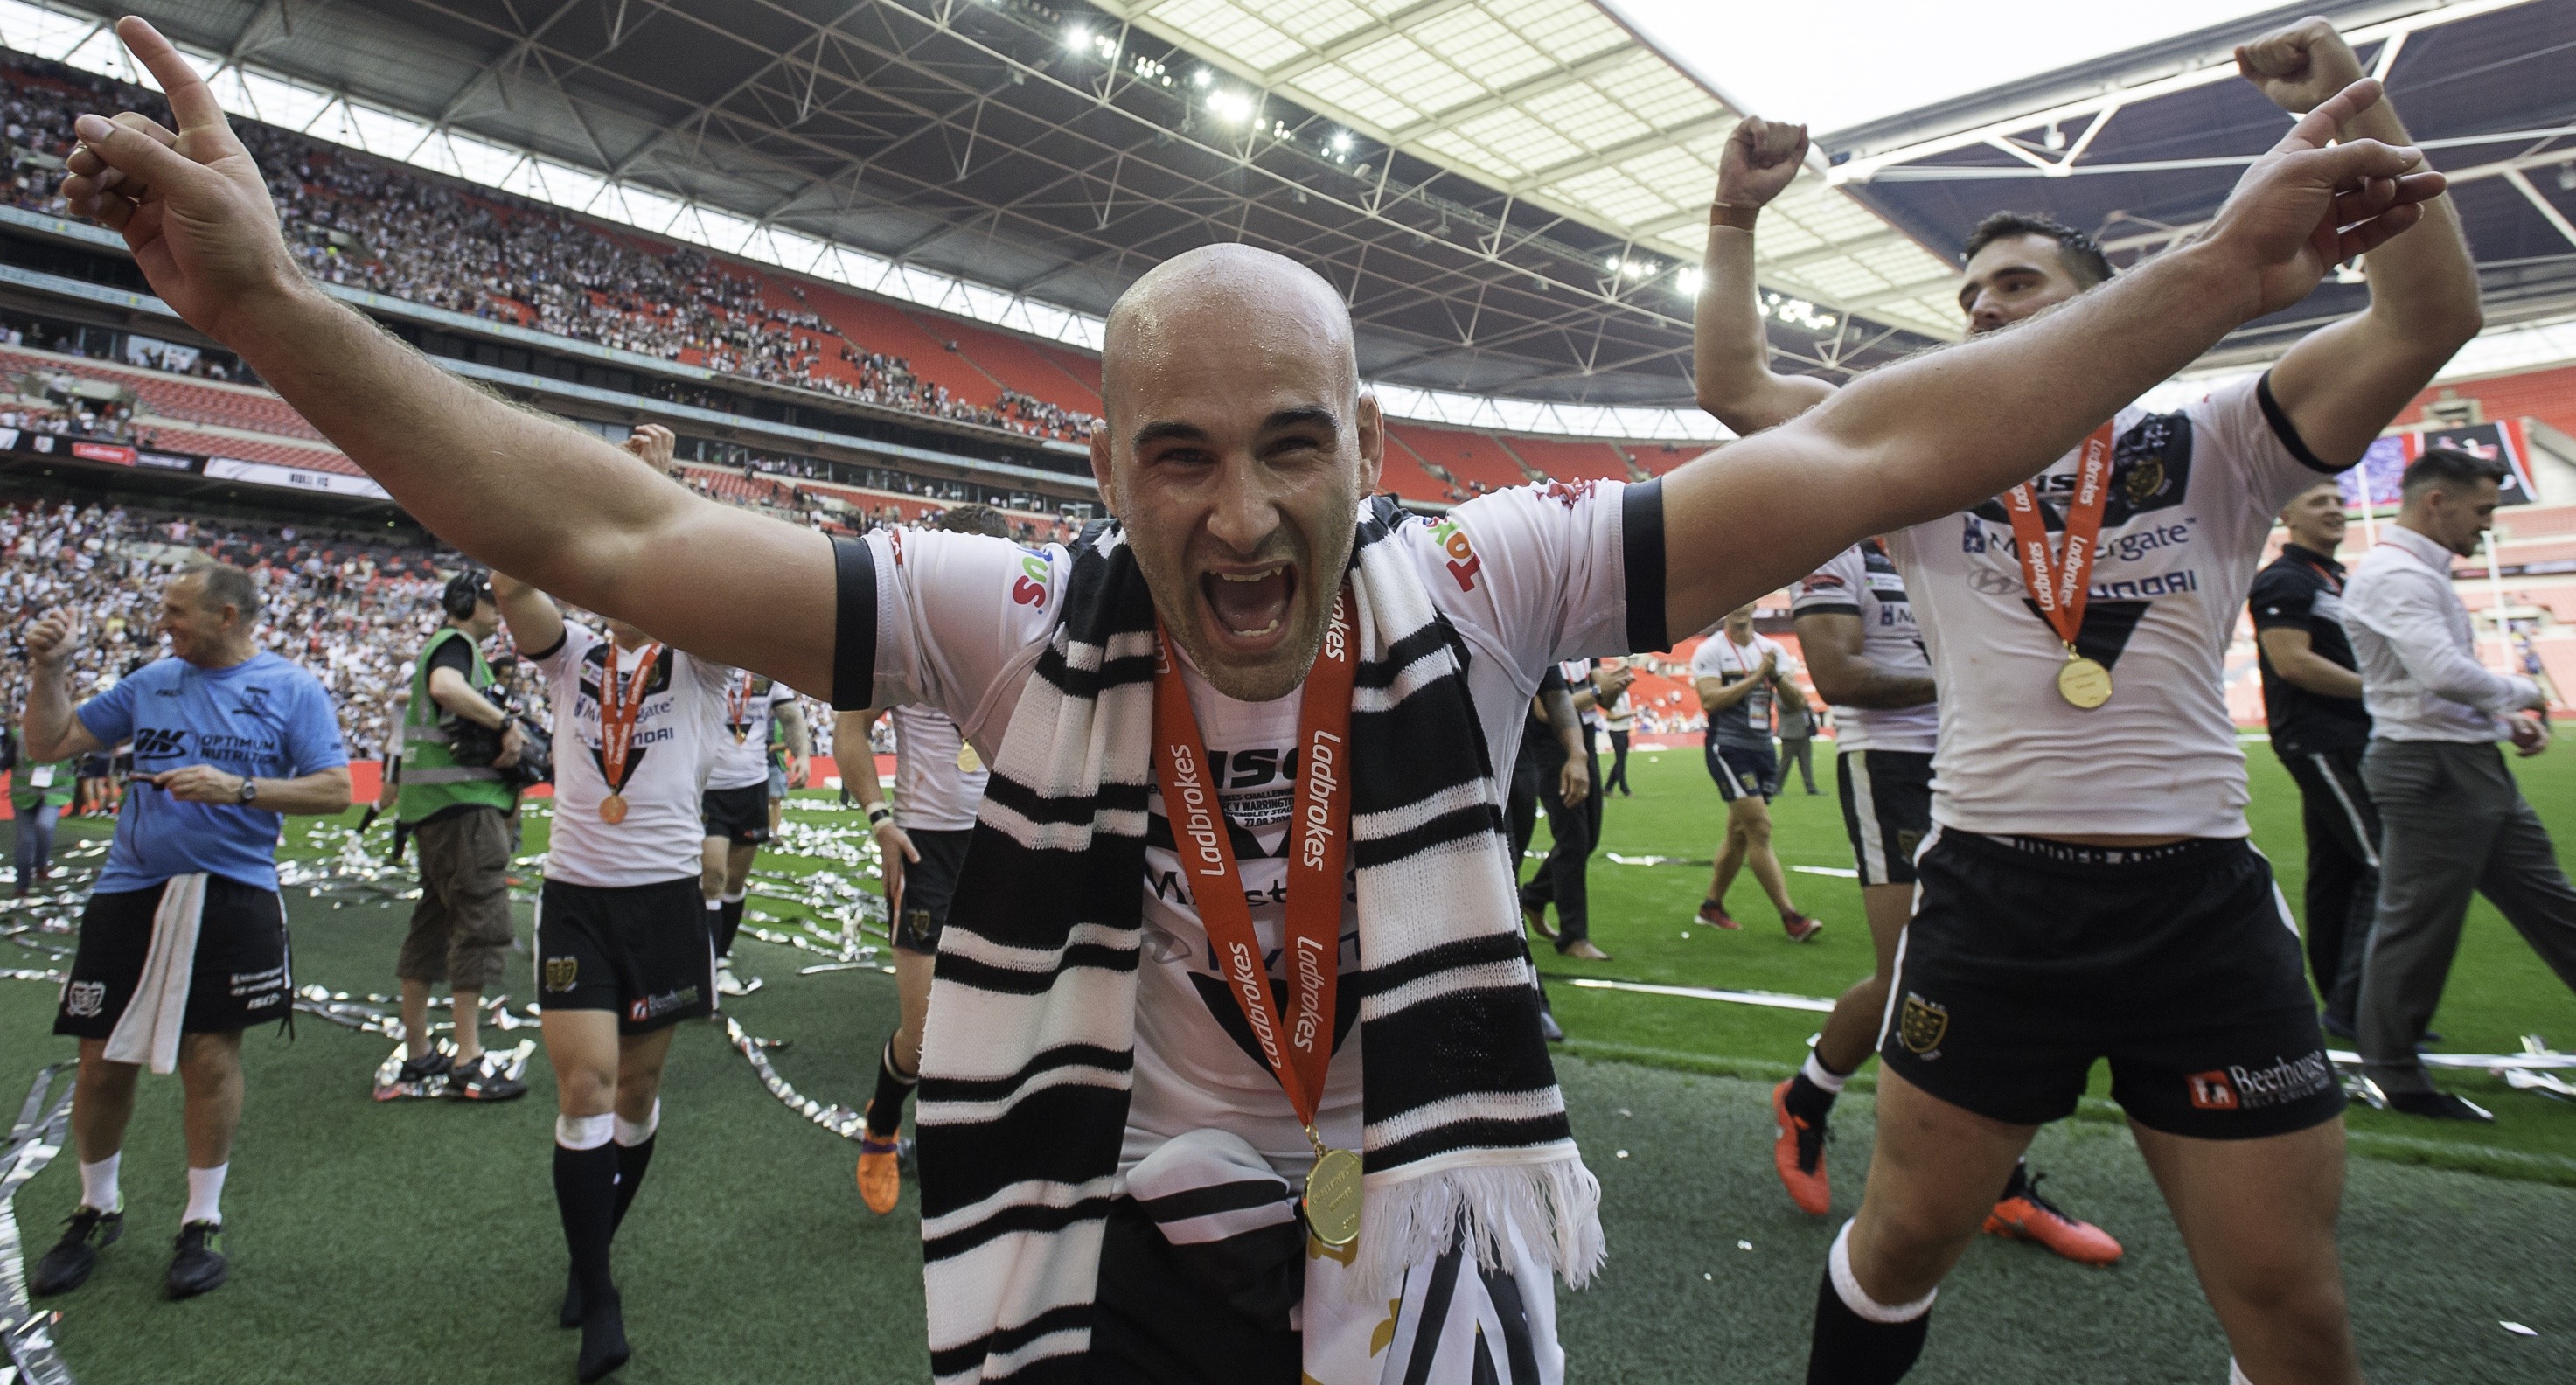 Danny Houghton | Transition